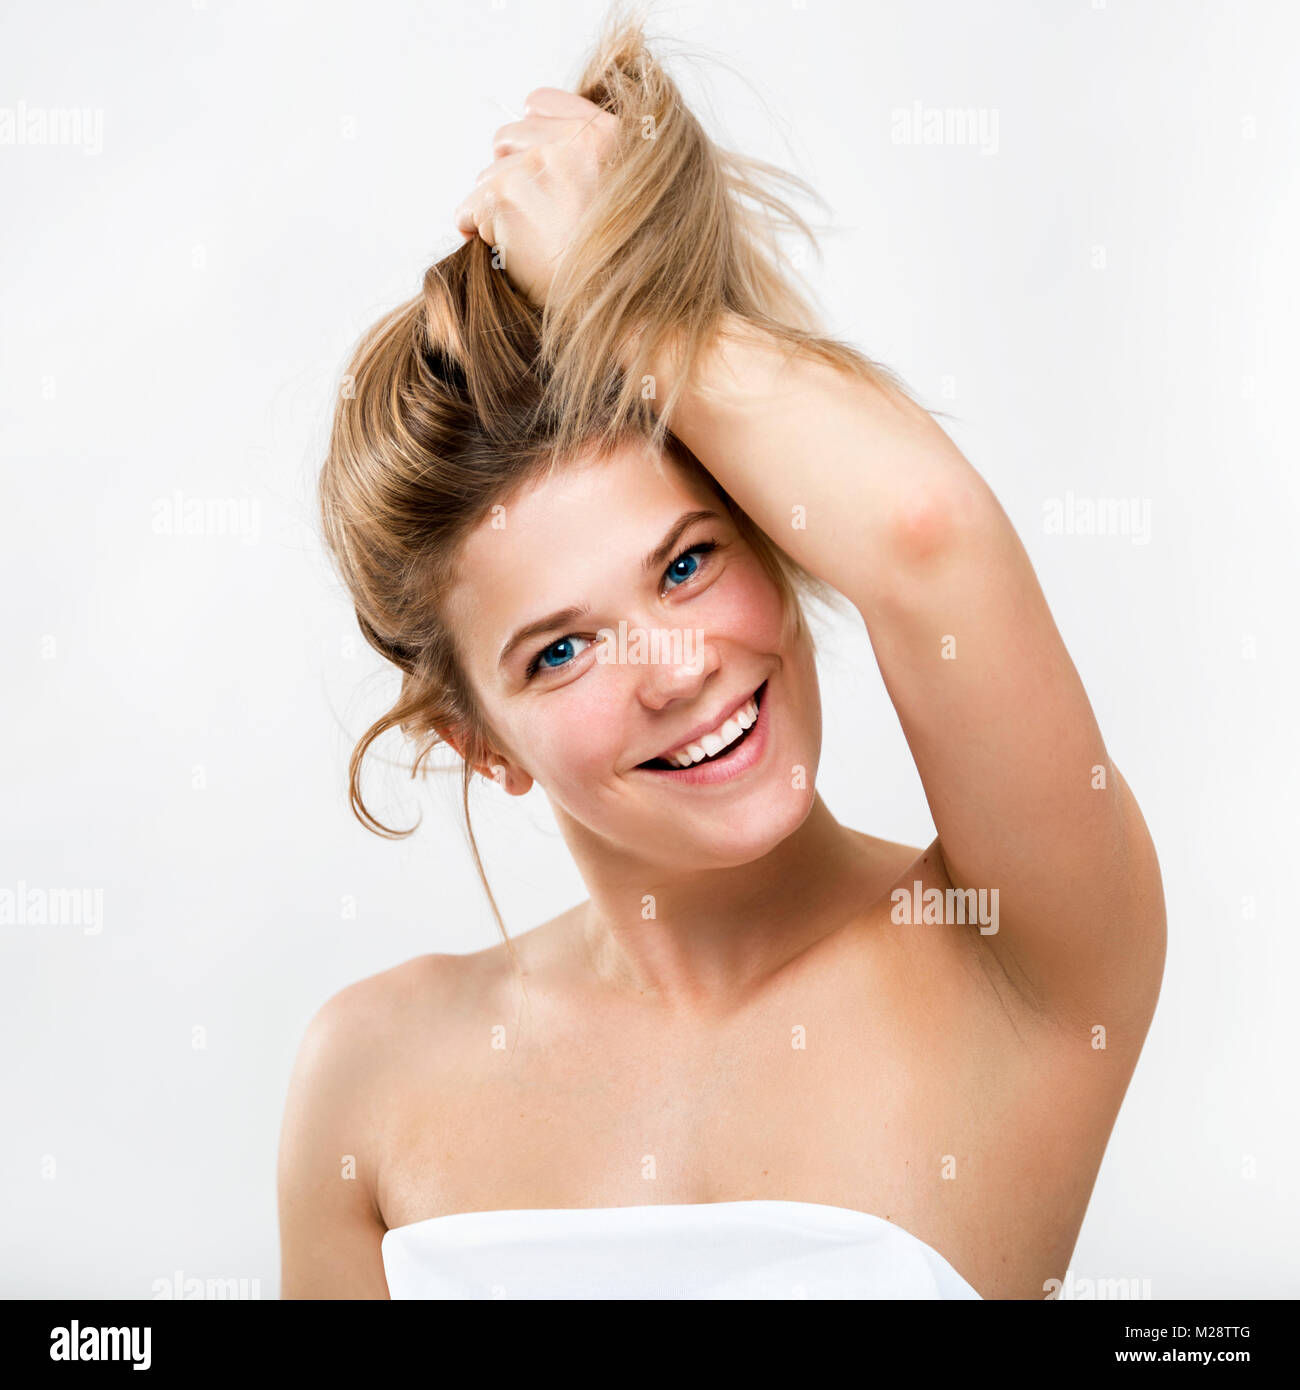 Portrait of a cute smiling young woman on a light background. Female face close-up. The girl demonstrates healthy beautiful hair Stock Photo